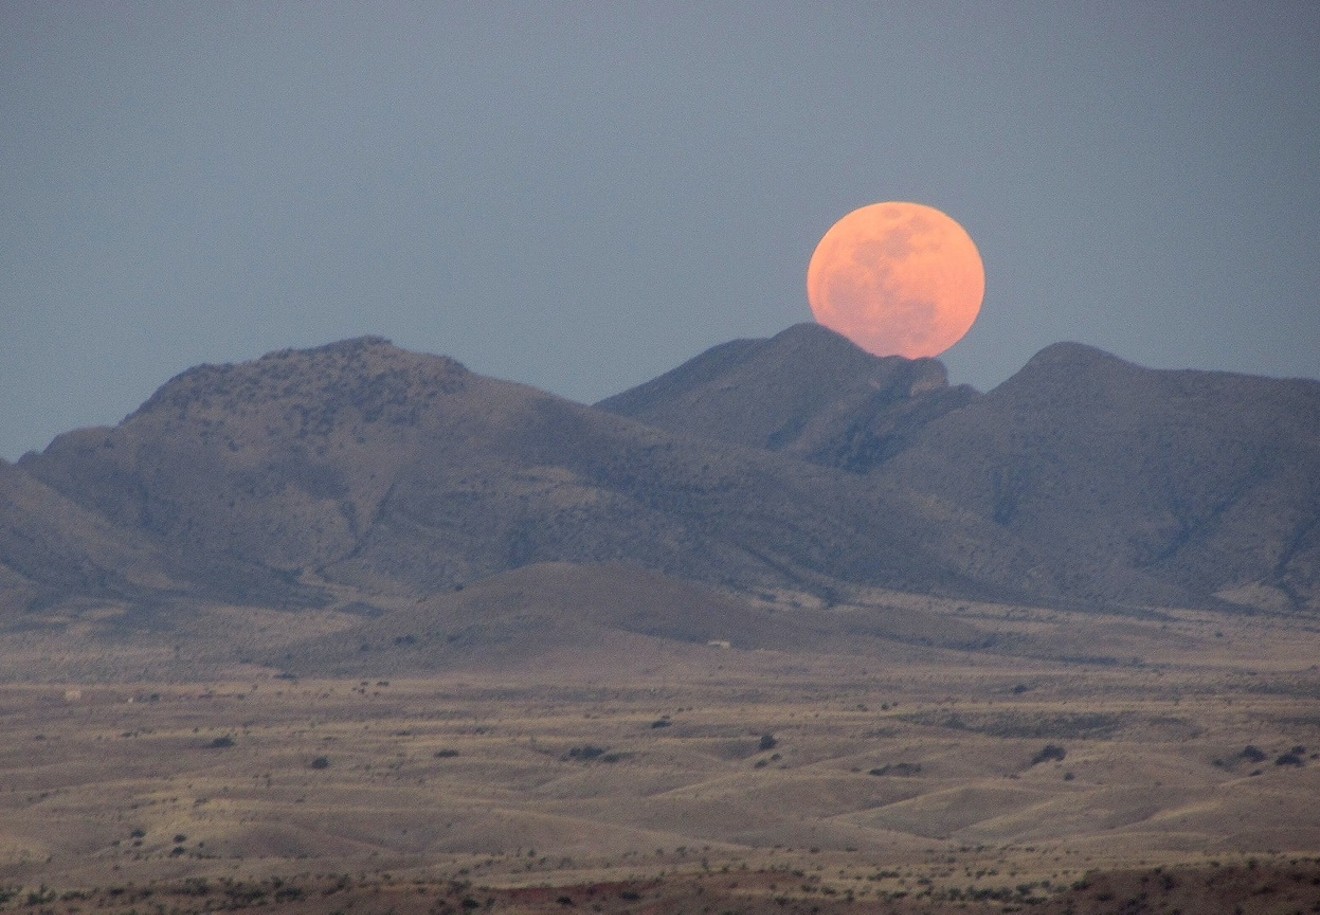 A supermoon in 2012 seen from southern Arizona.